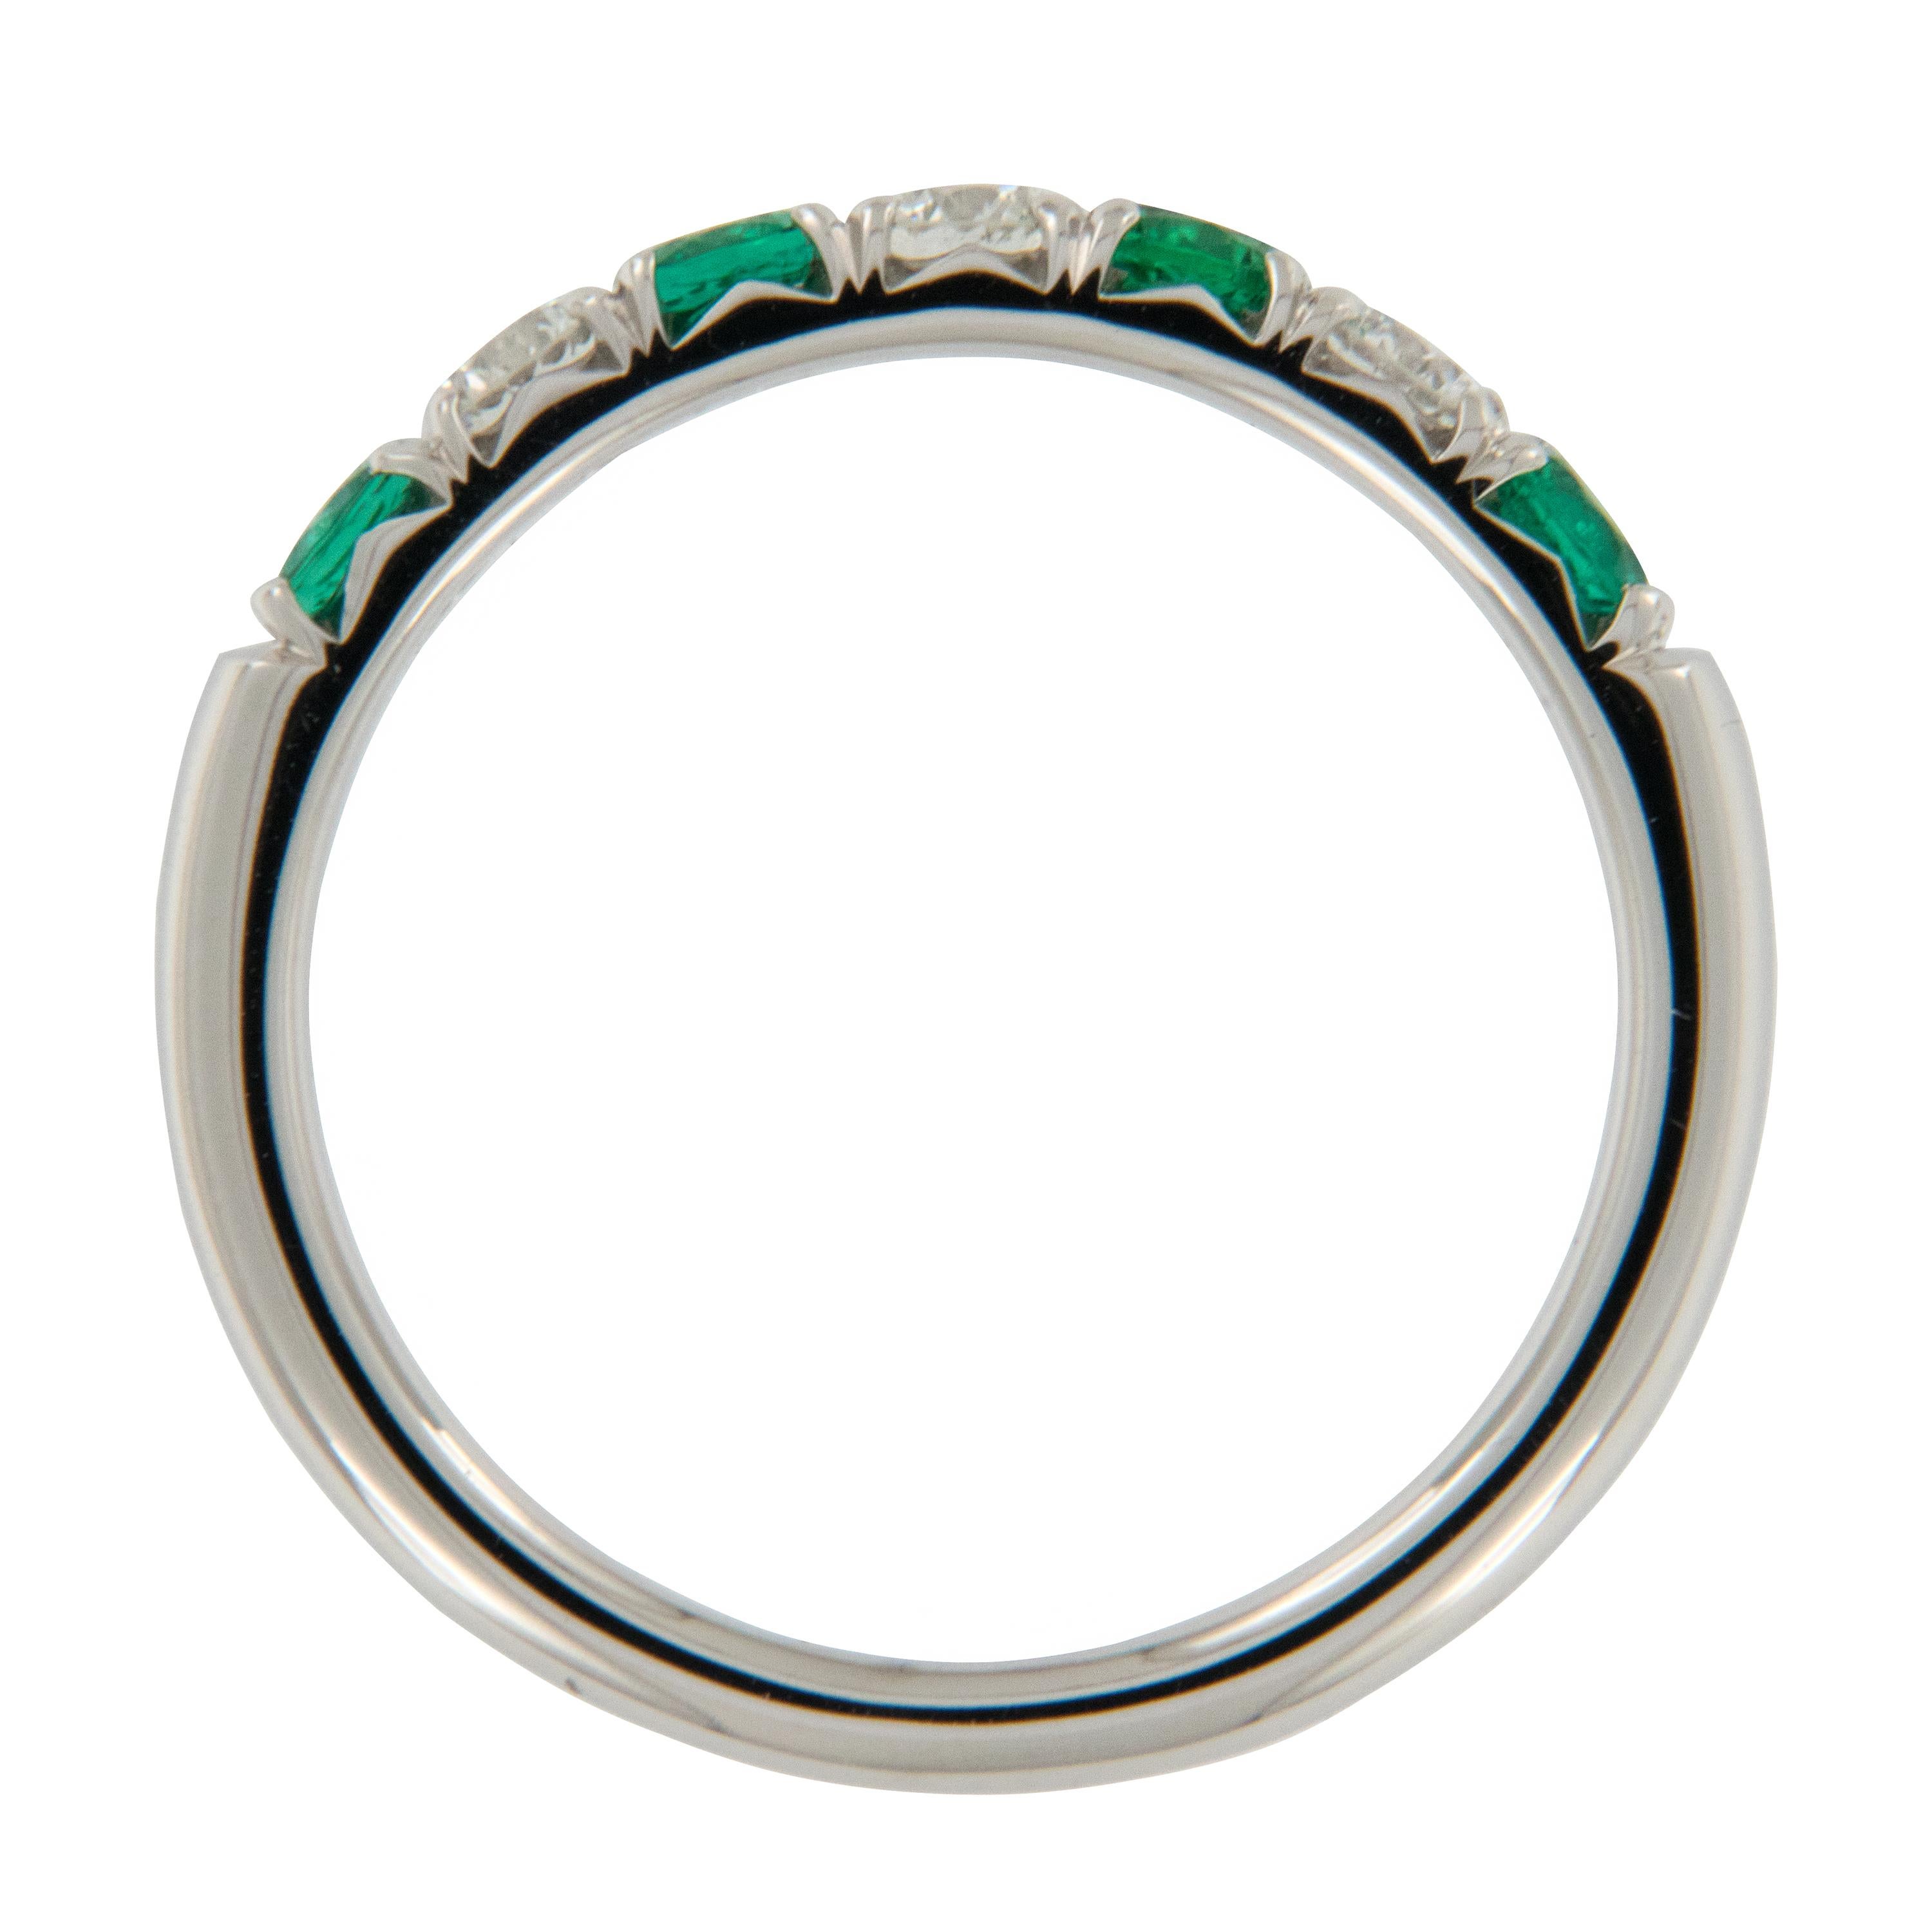 Round Cut 18 Karat White Gold Emerald & Diamond Stackable Band Ring by Spark Creations